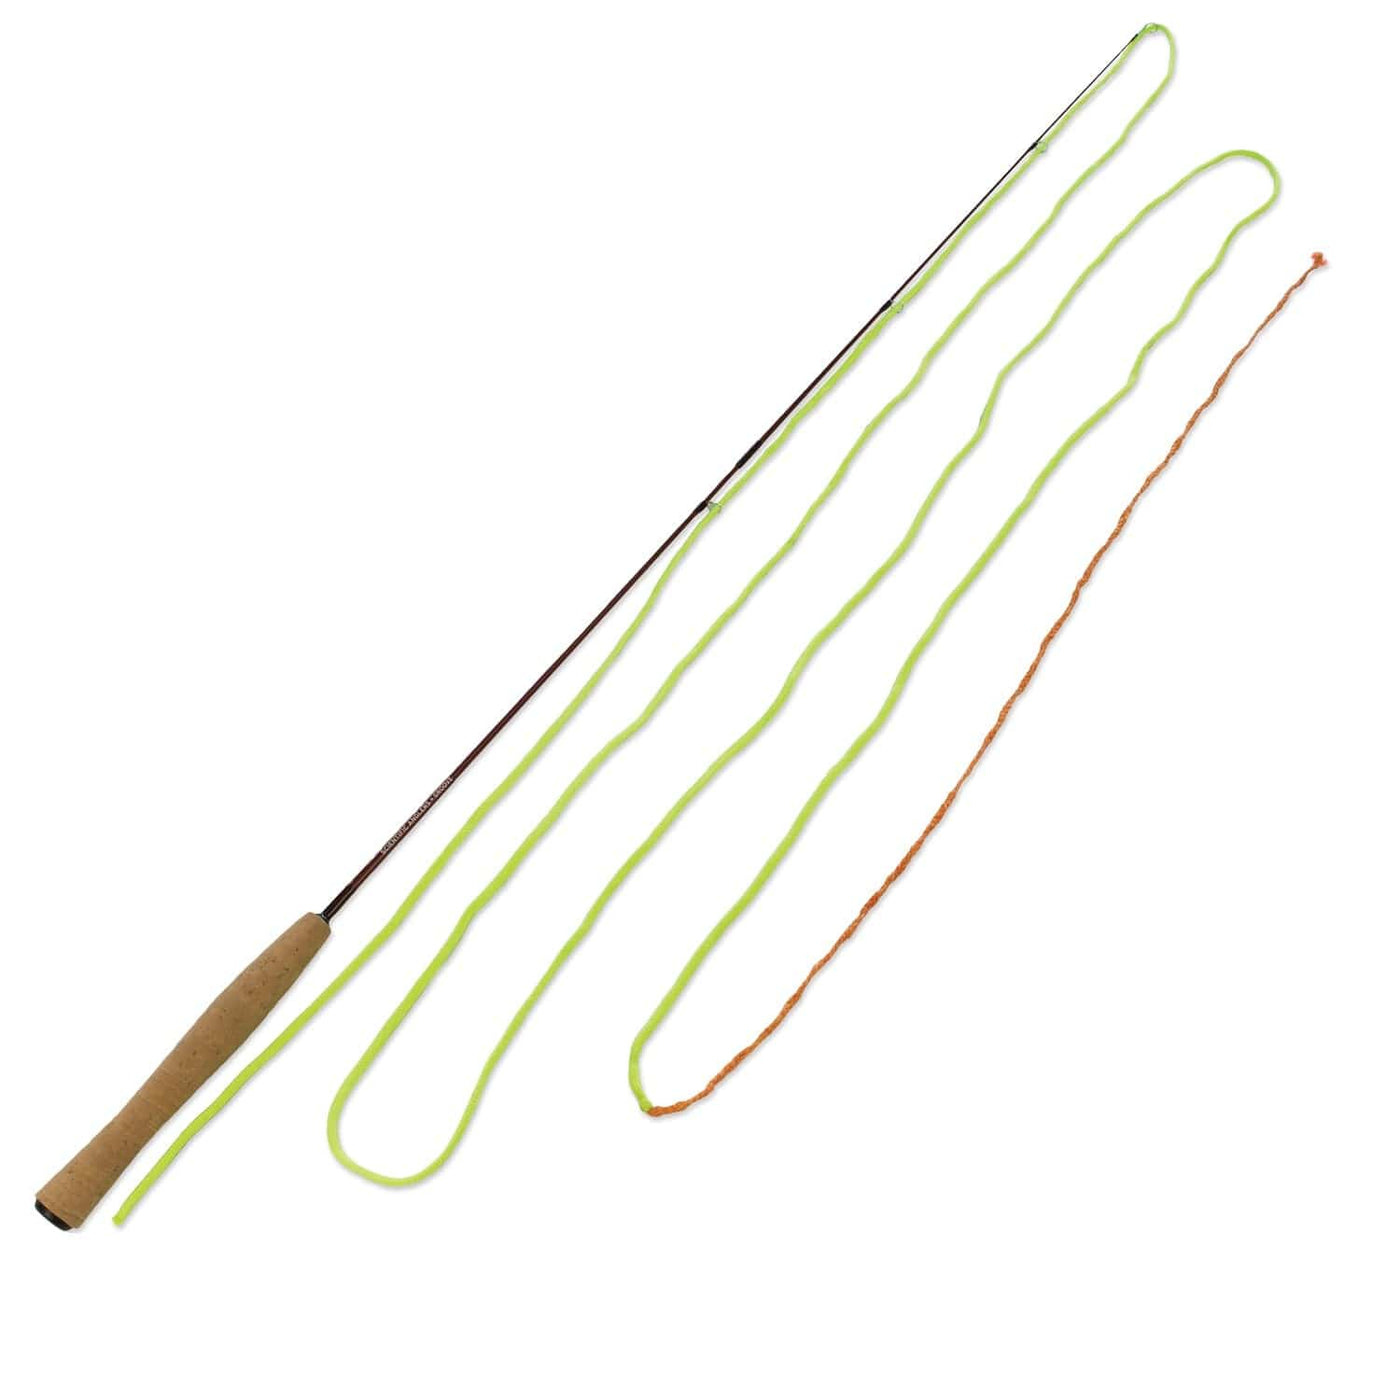 Scientific Anglers Scientific Anglers Groove Practice Fly Rod Fishing